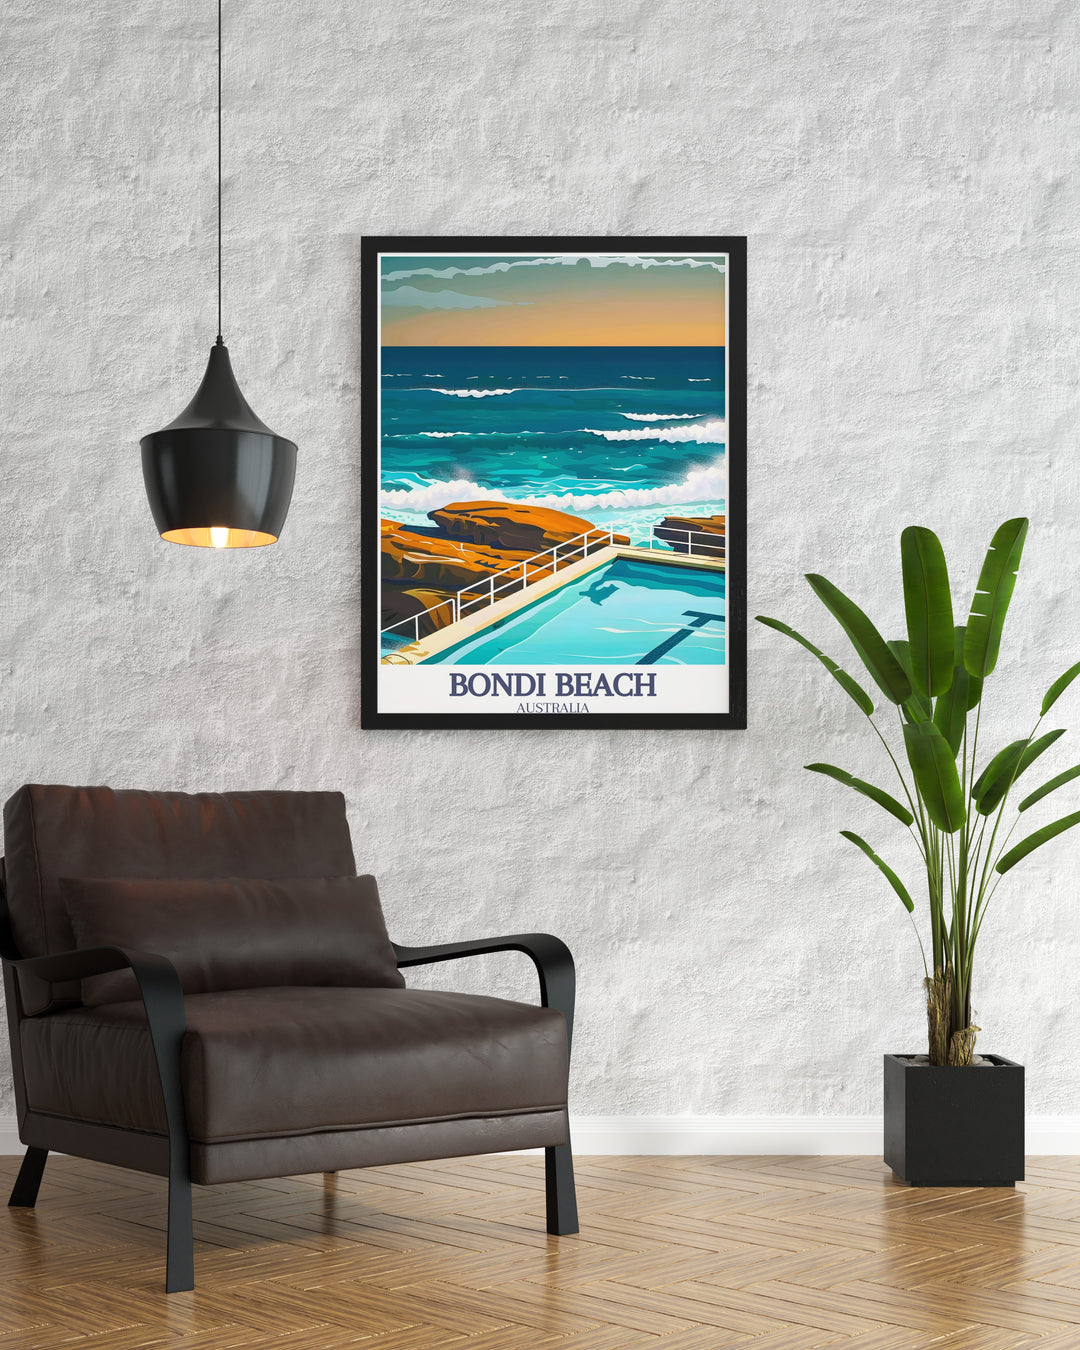 Vintage travel print of Sydney Harbour featuring the iconic structures of the Sydney Opera House and Harbour Bridge. Bondi Icebergs pool Bondi digital print adding vibrant beach scenes to your walls. Perfect for lovers of retro travel posters and Australia art.